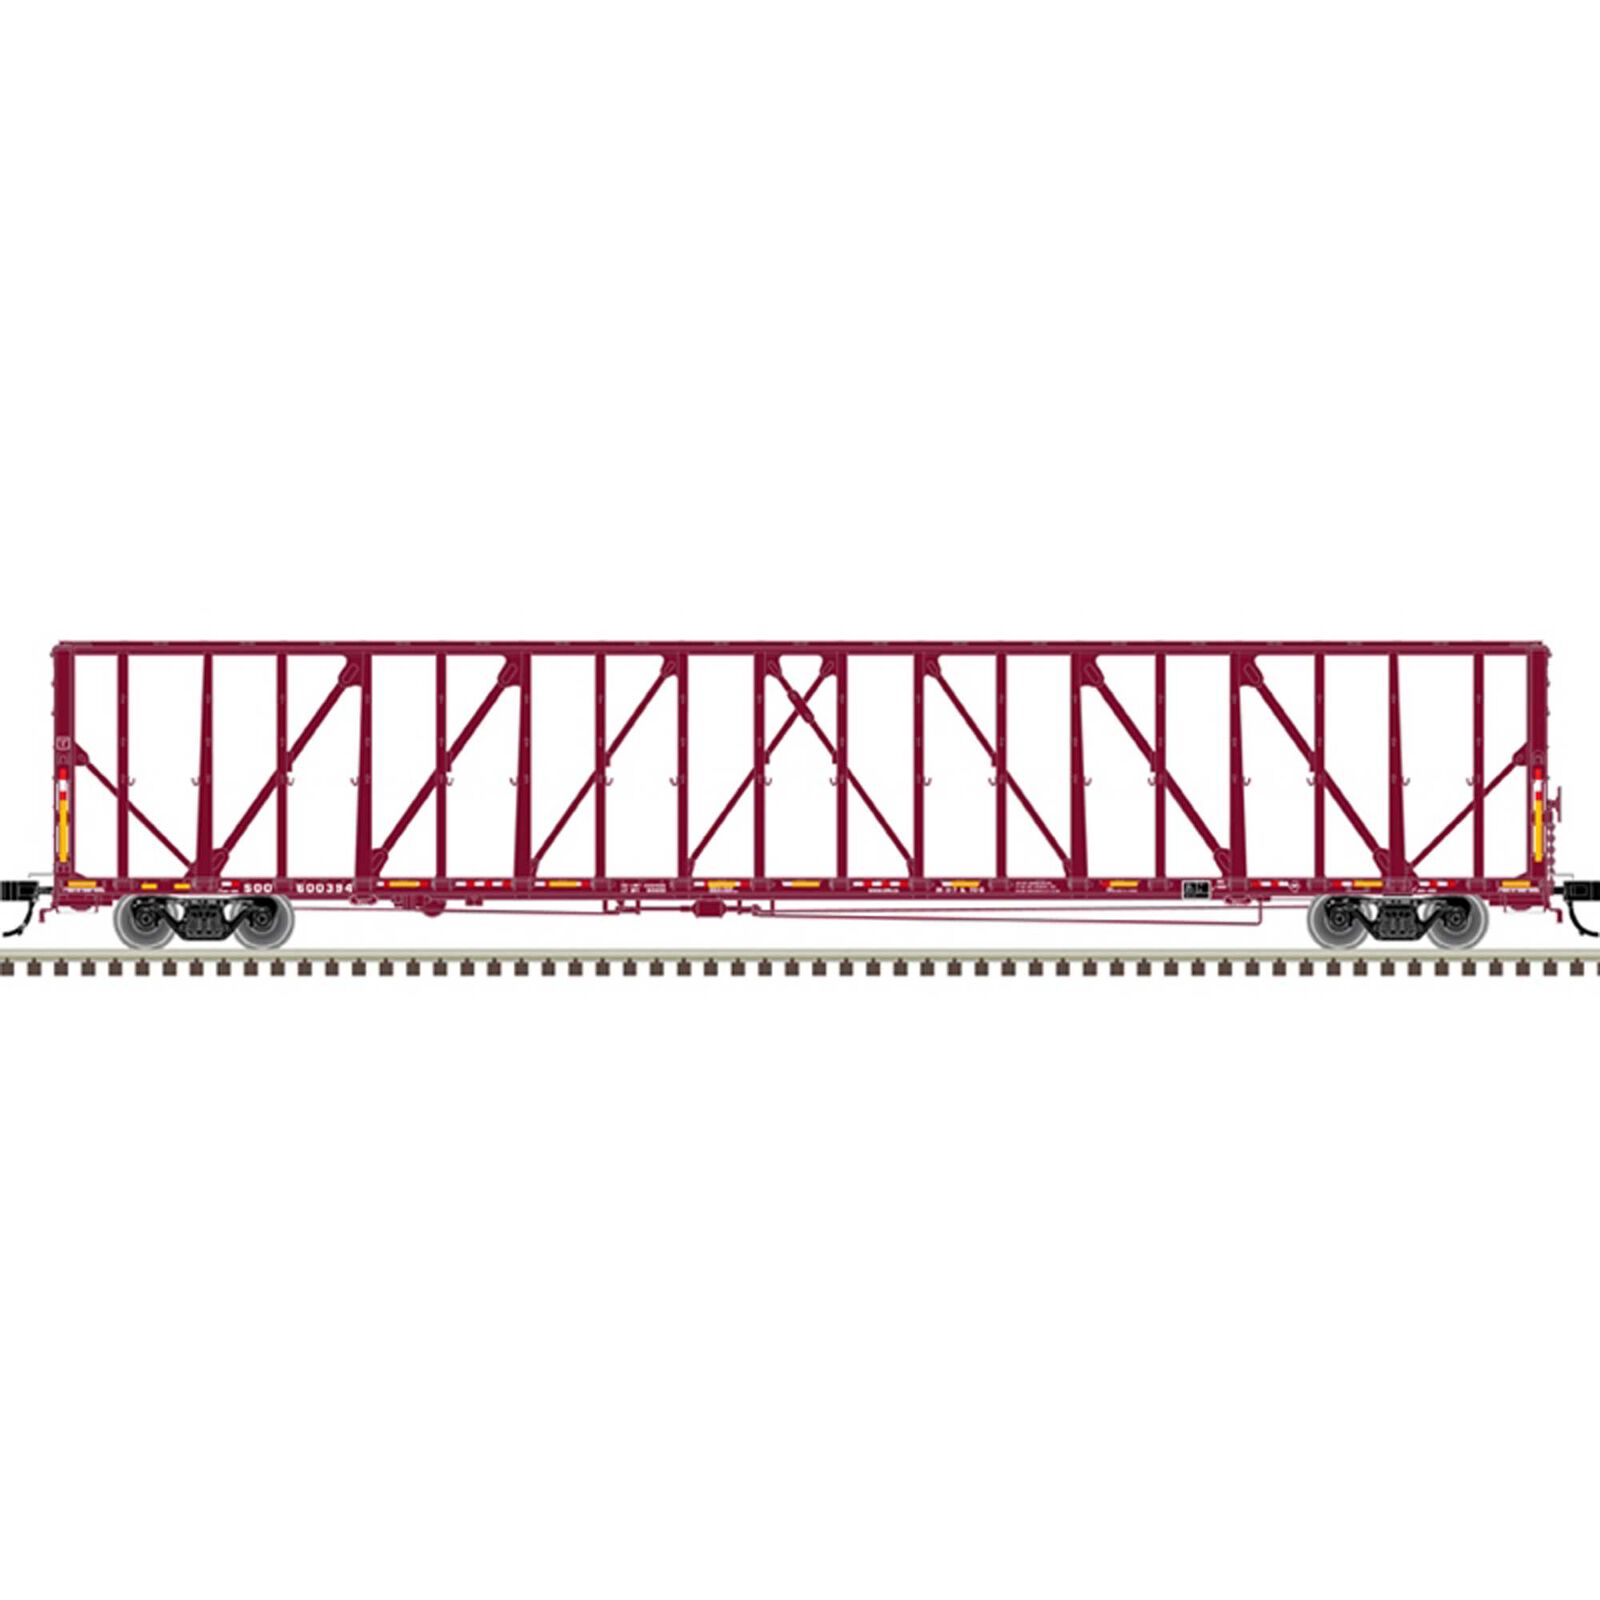 Canadian Pacific (SOO) 600373 (Brown/White/Red)